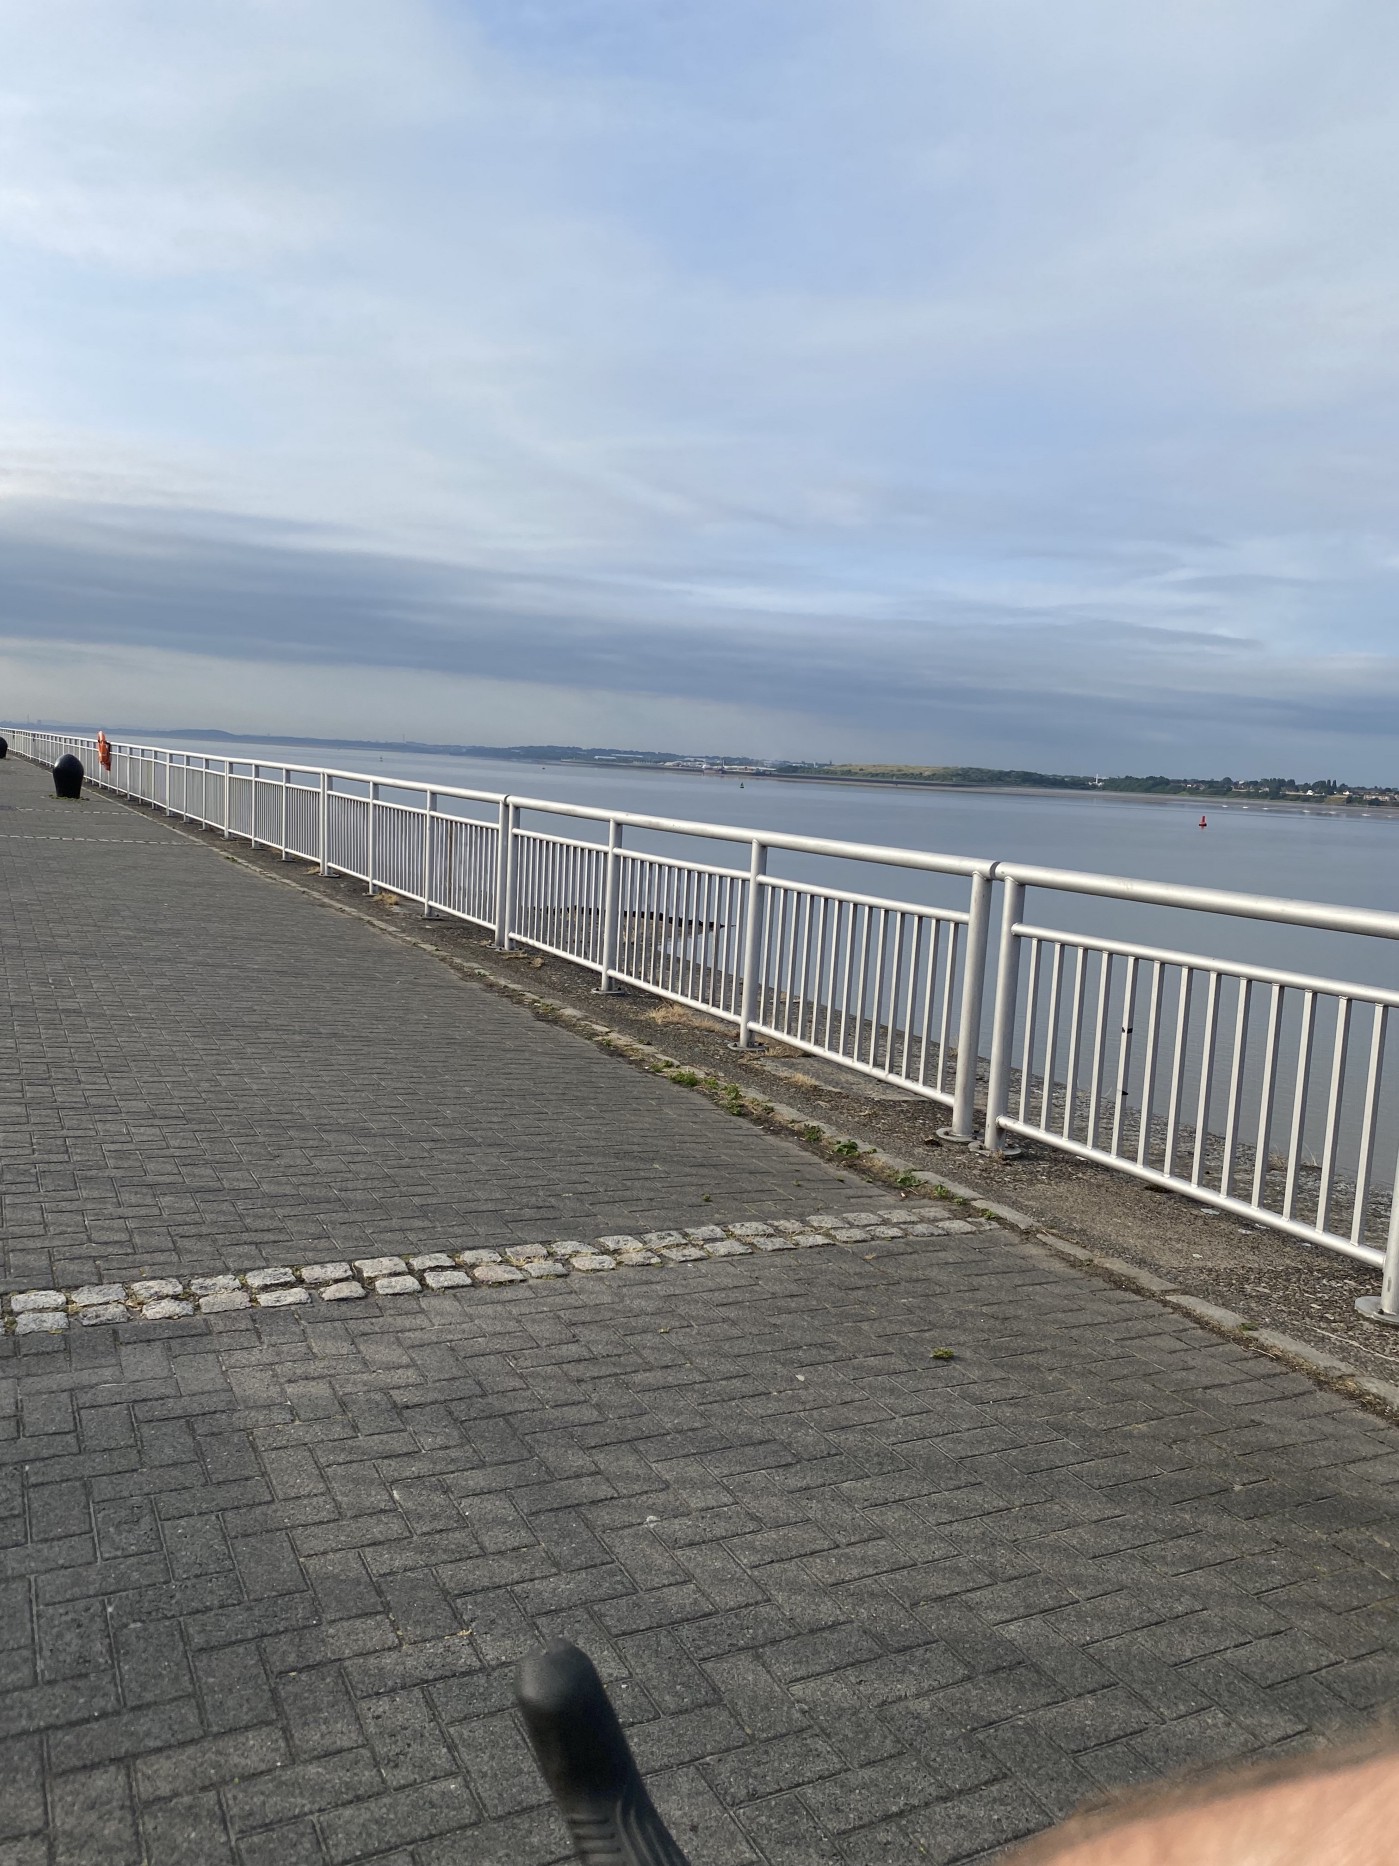 View of the River Mersey in Liverpool from the cyclepath, with some railings in between